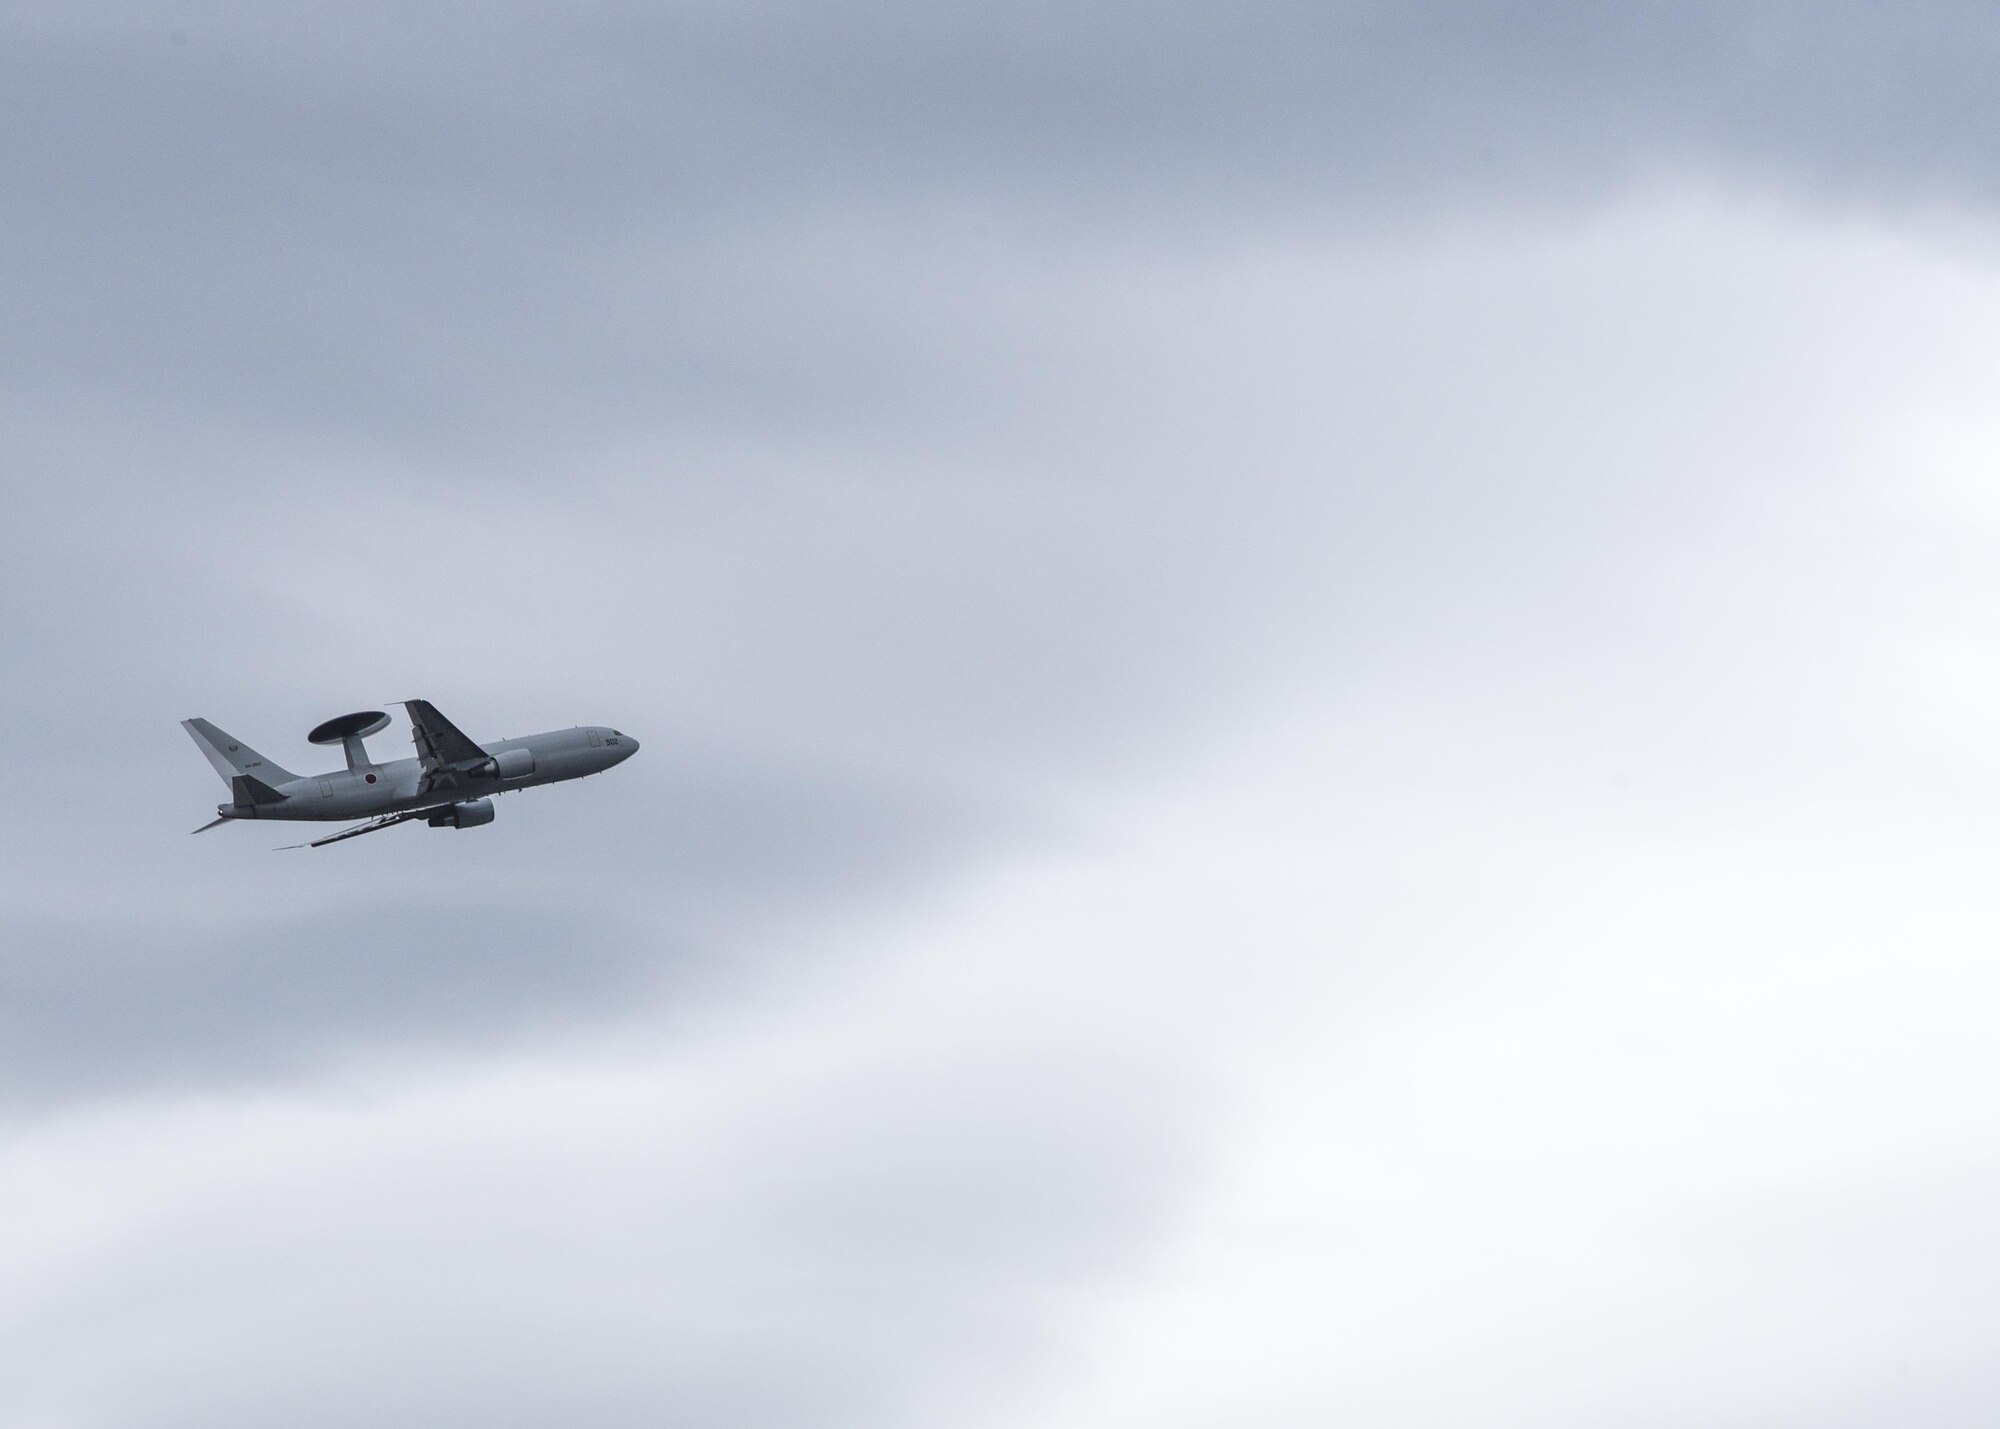 A Japan Air Self-Defense Force E-757, an airborne early warning and control aircraft, soars over Misawa Air Base, Japan, April 19, 2017. The E-757 was one of 18 aircraft that participated in a bi-annual bilateral training exercise, part of a continuous exercise program to enhance interoperability between U.S. and Japan forces. (U.S. Air Force photo by Staff Sgt. Melanie A. Hutto) 